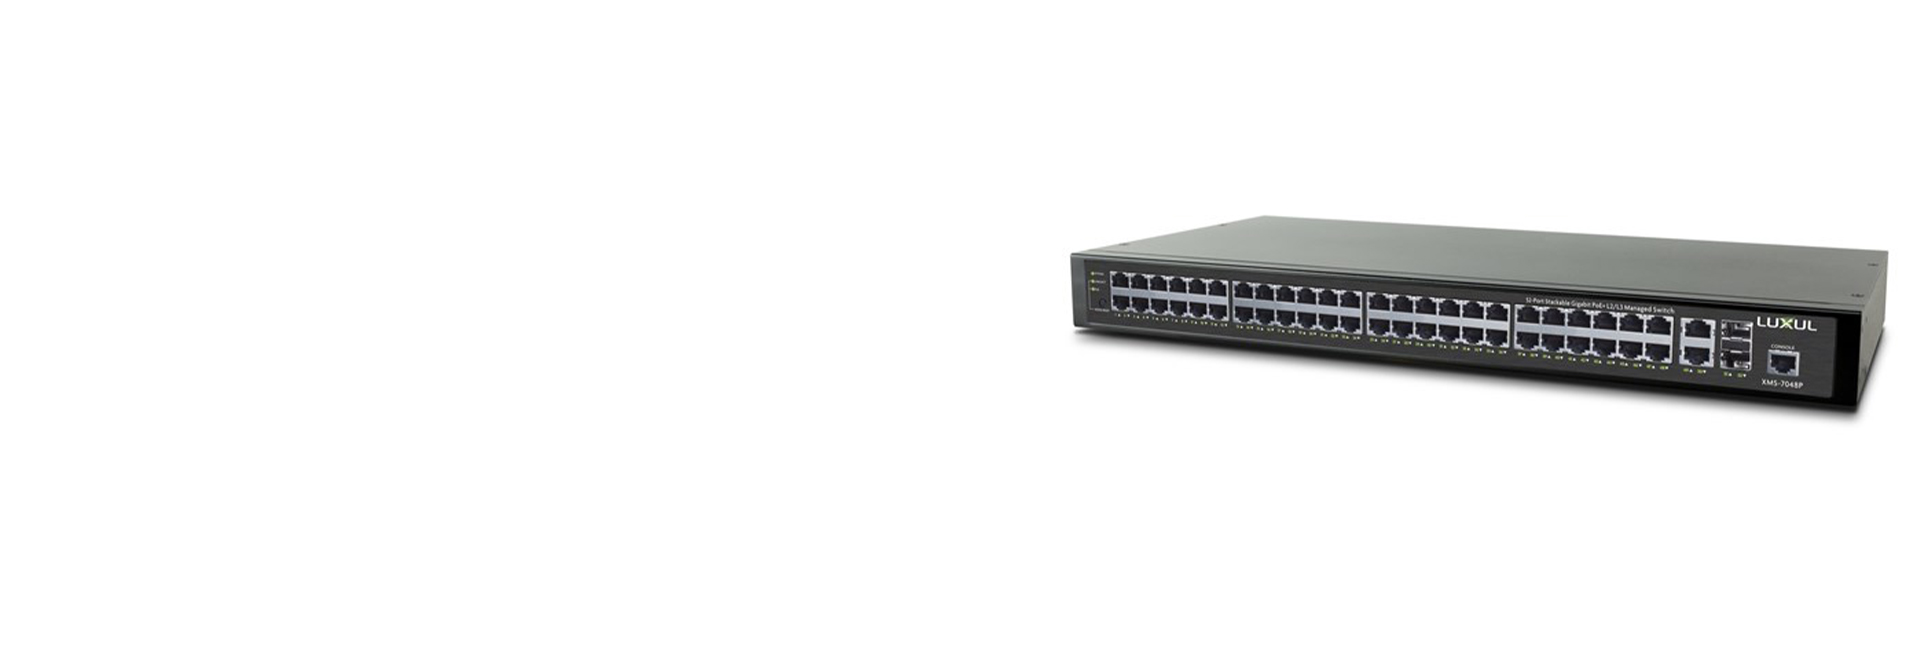 L2 l3 managed switch with 4 sfp luxul